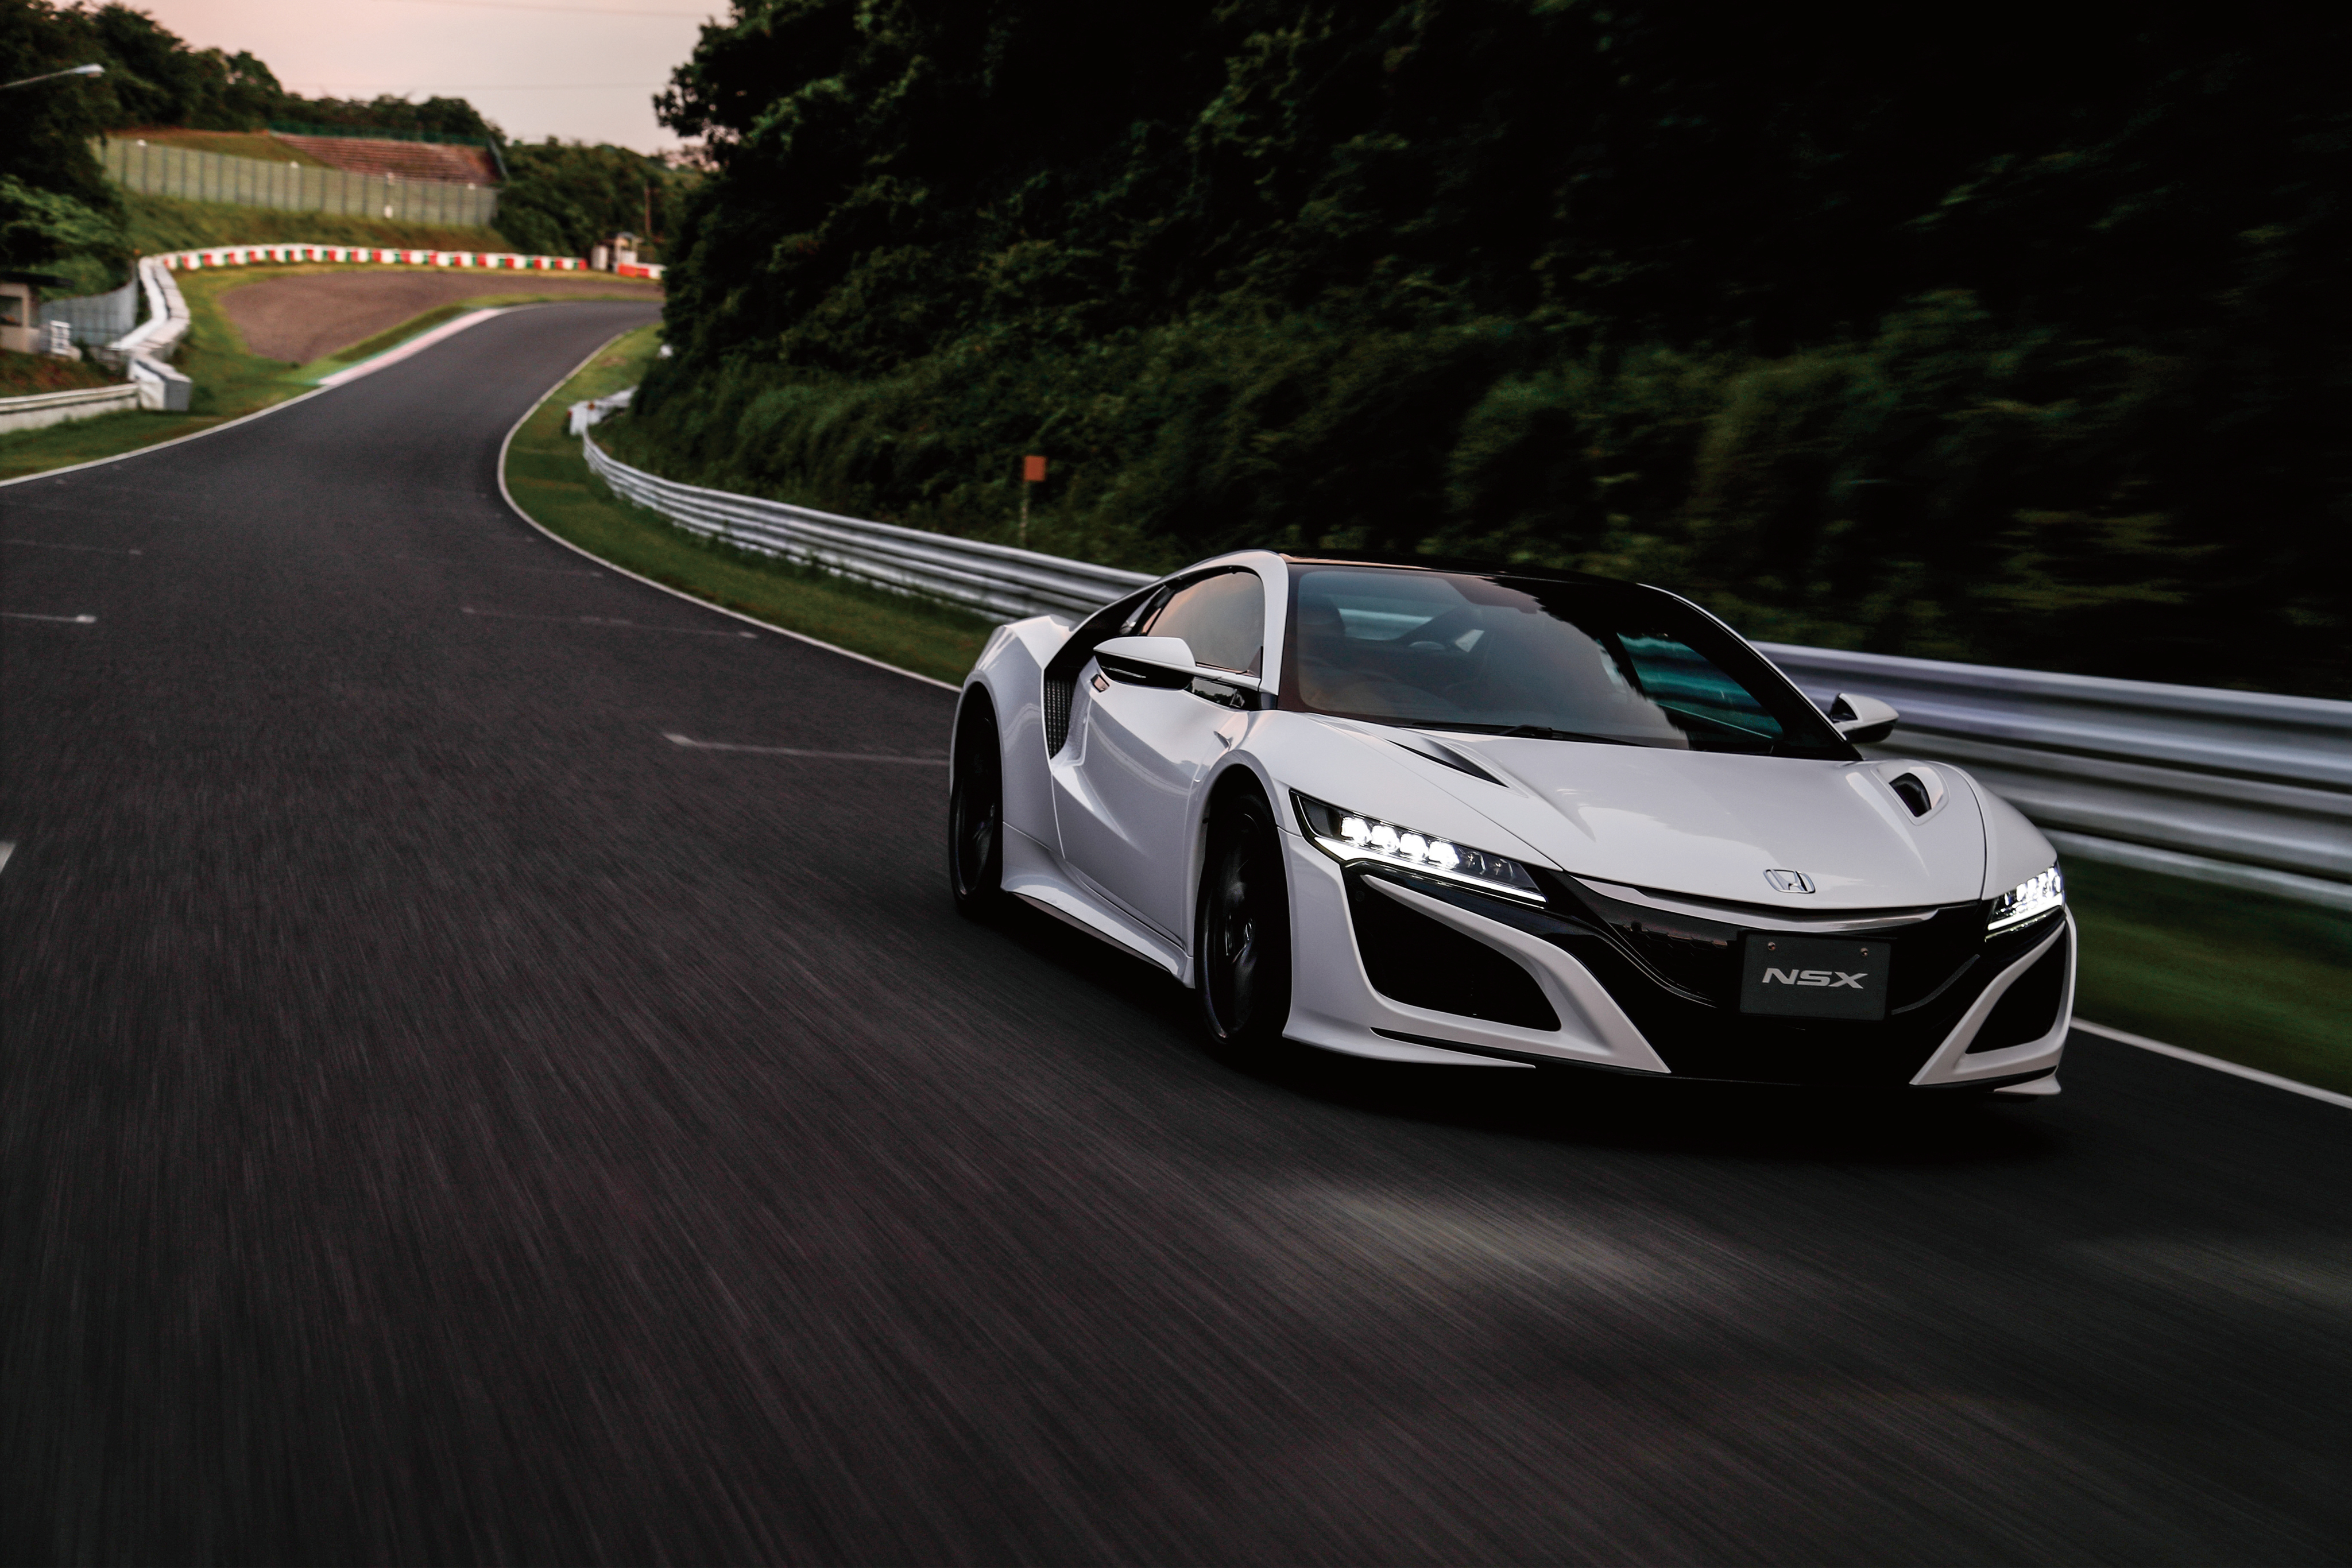 honda, cars, traffic, movement, side view, nsx images